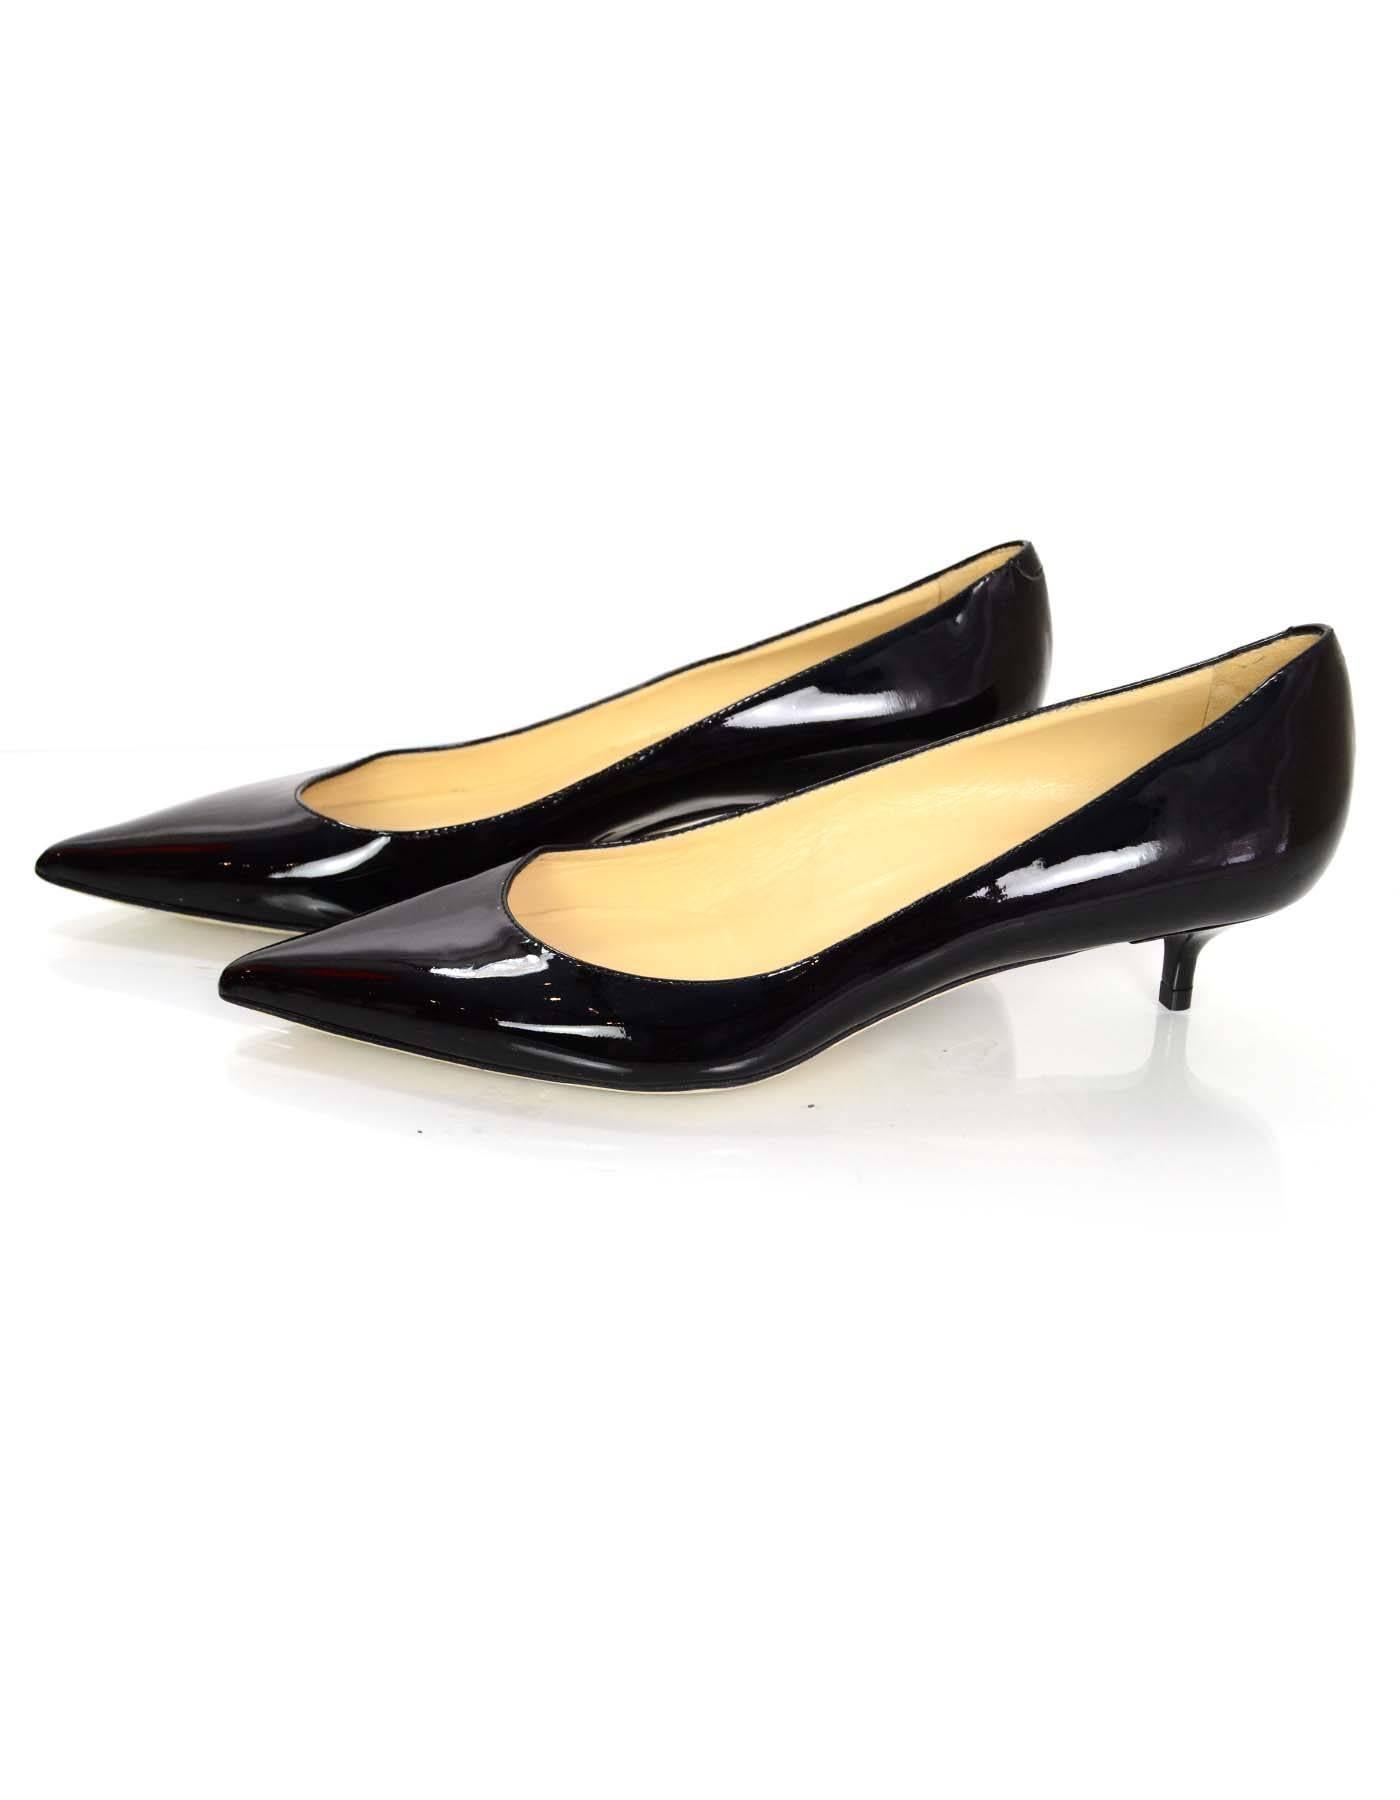 Jimmy Choo Black Patent Leather Aza Kitten Heels Sz 36

Features pointed toes

Made In: Italy
Color: Black
Materials: Patent leather
Closure/Opening: Slide on
Sole Stamp: Jimmy Choo London Made in Italy 36
Retail Price: $645 + tax
Overall